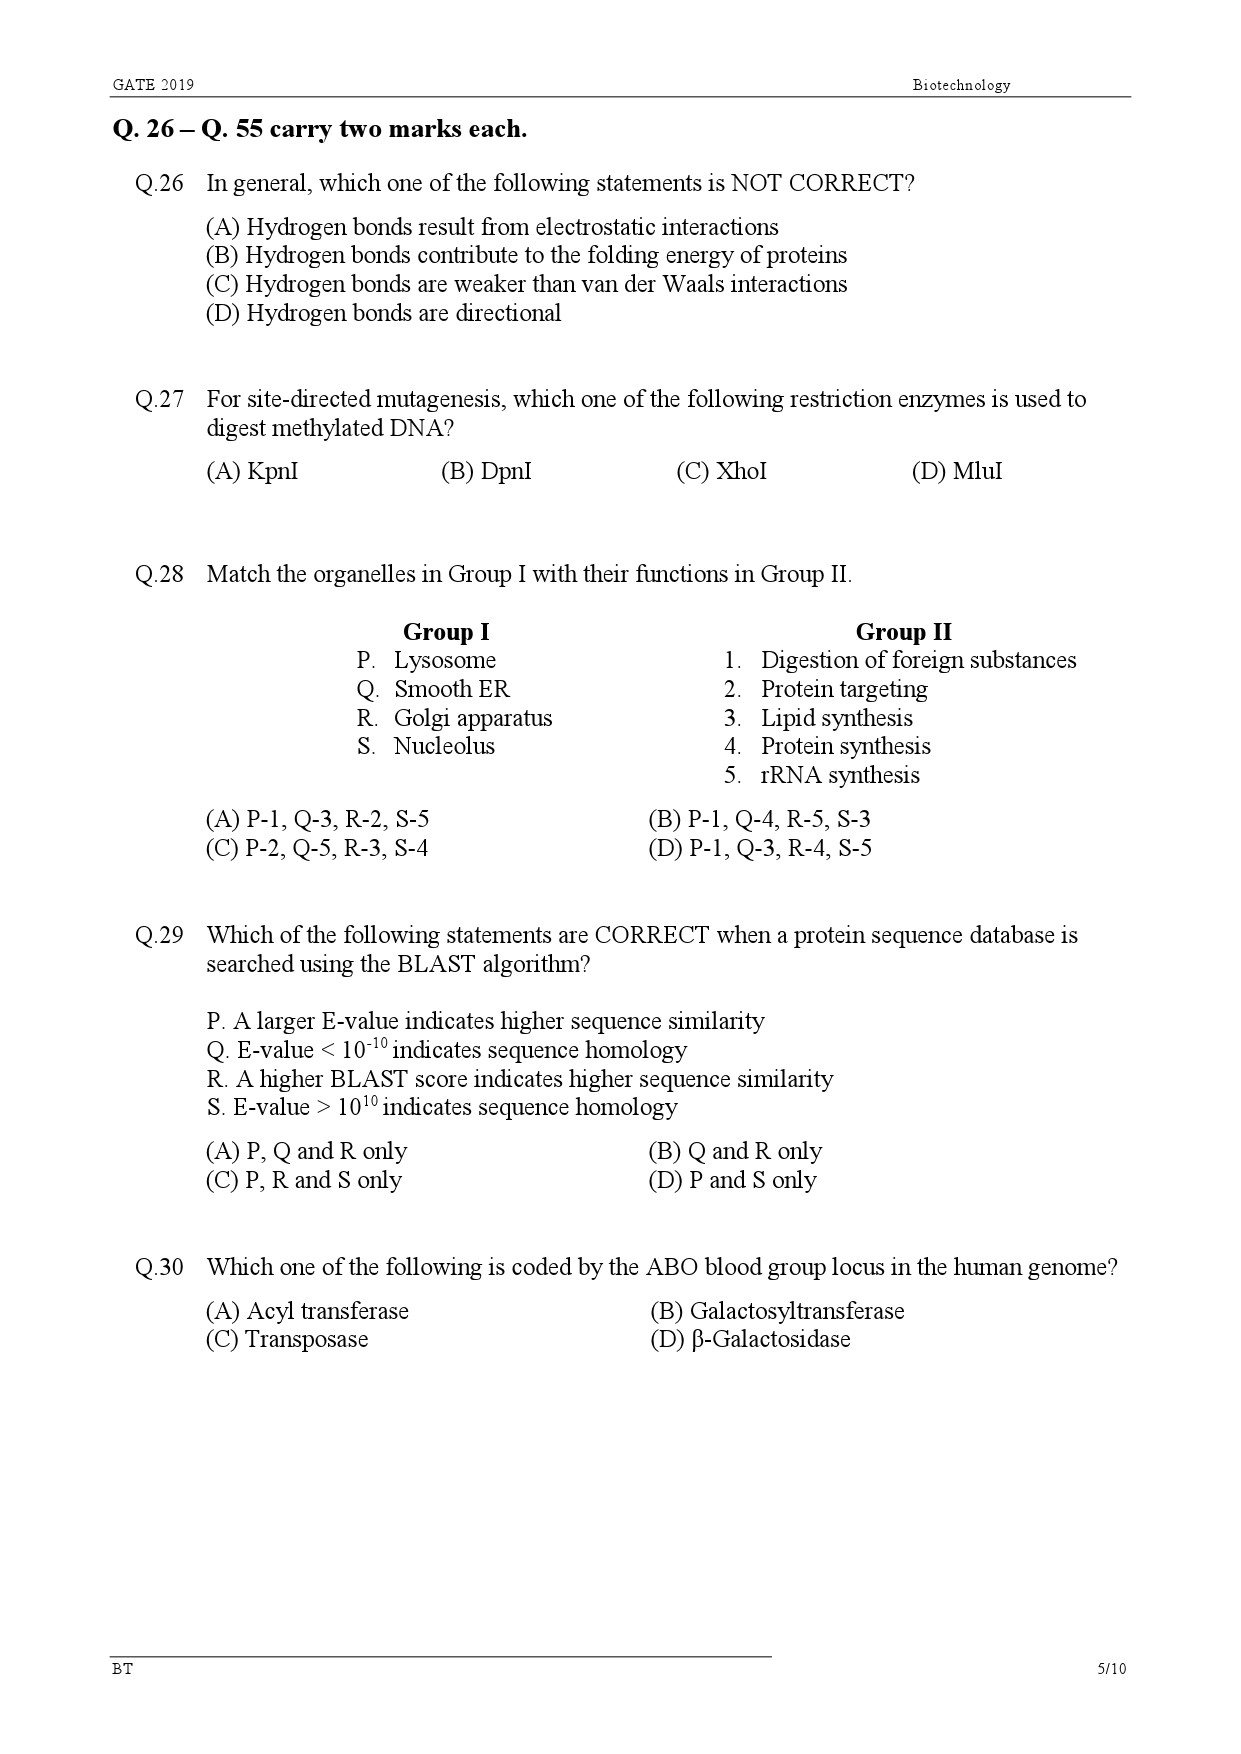 GATE Exam Question Paper 2019 Biotechnology 8